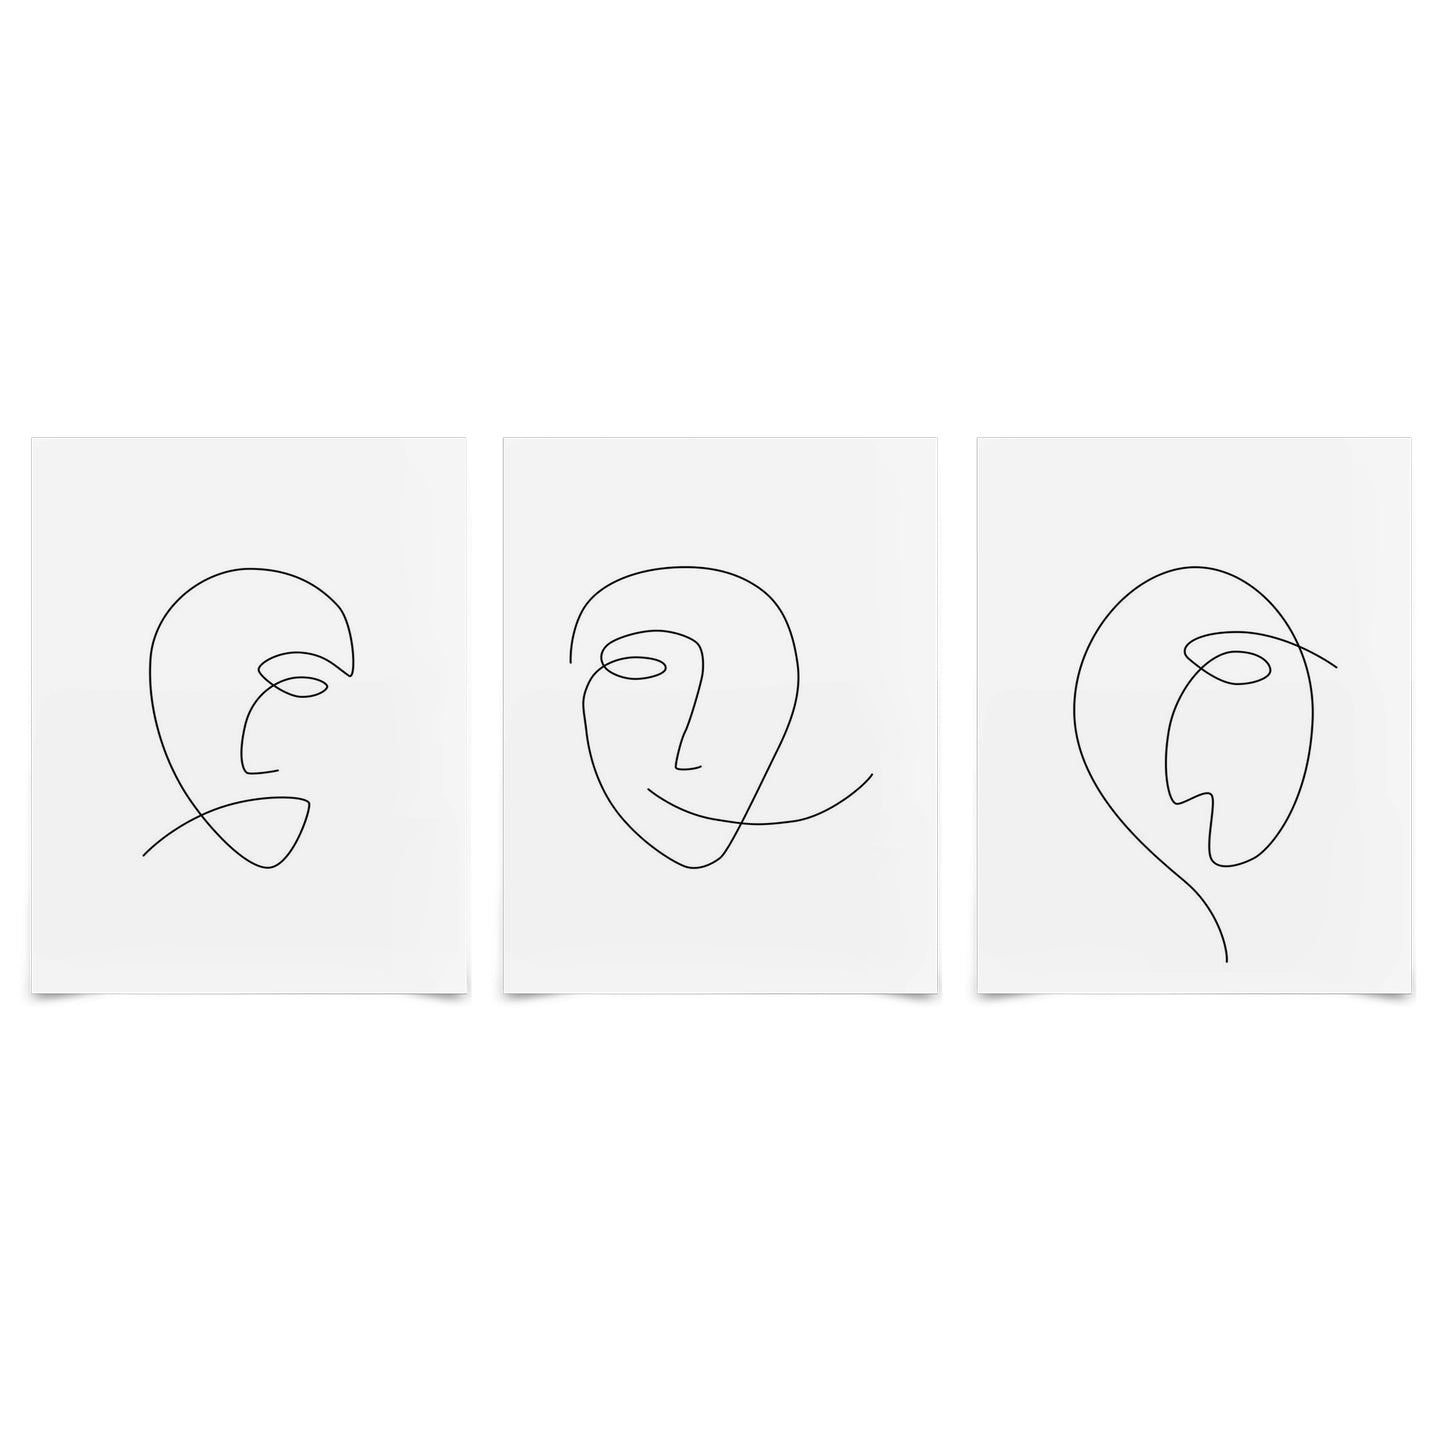 (Set of 3) Triptych Wall Art Minimalist Female Faces by Explicit Design - Poster Print